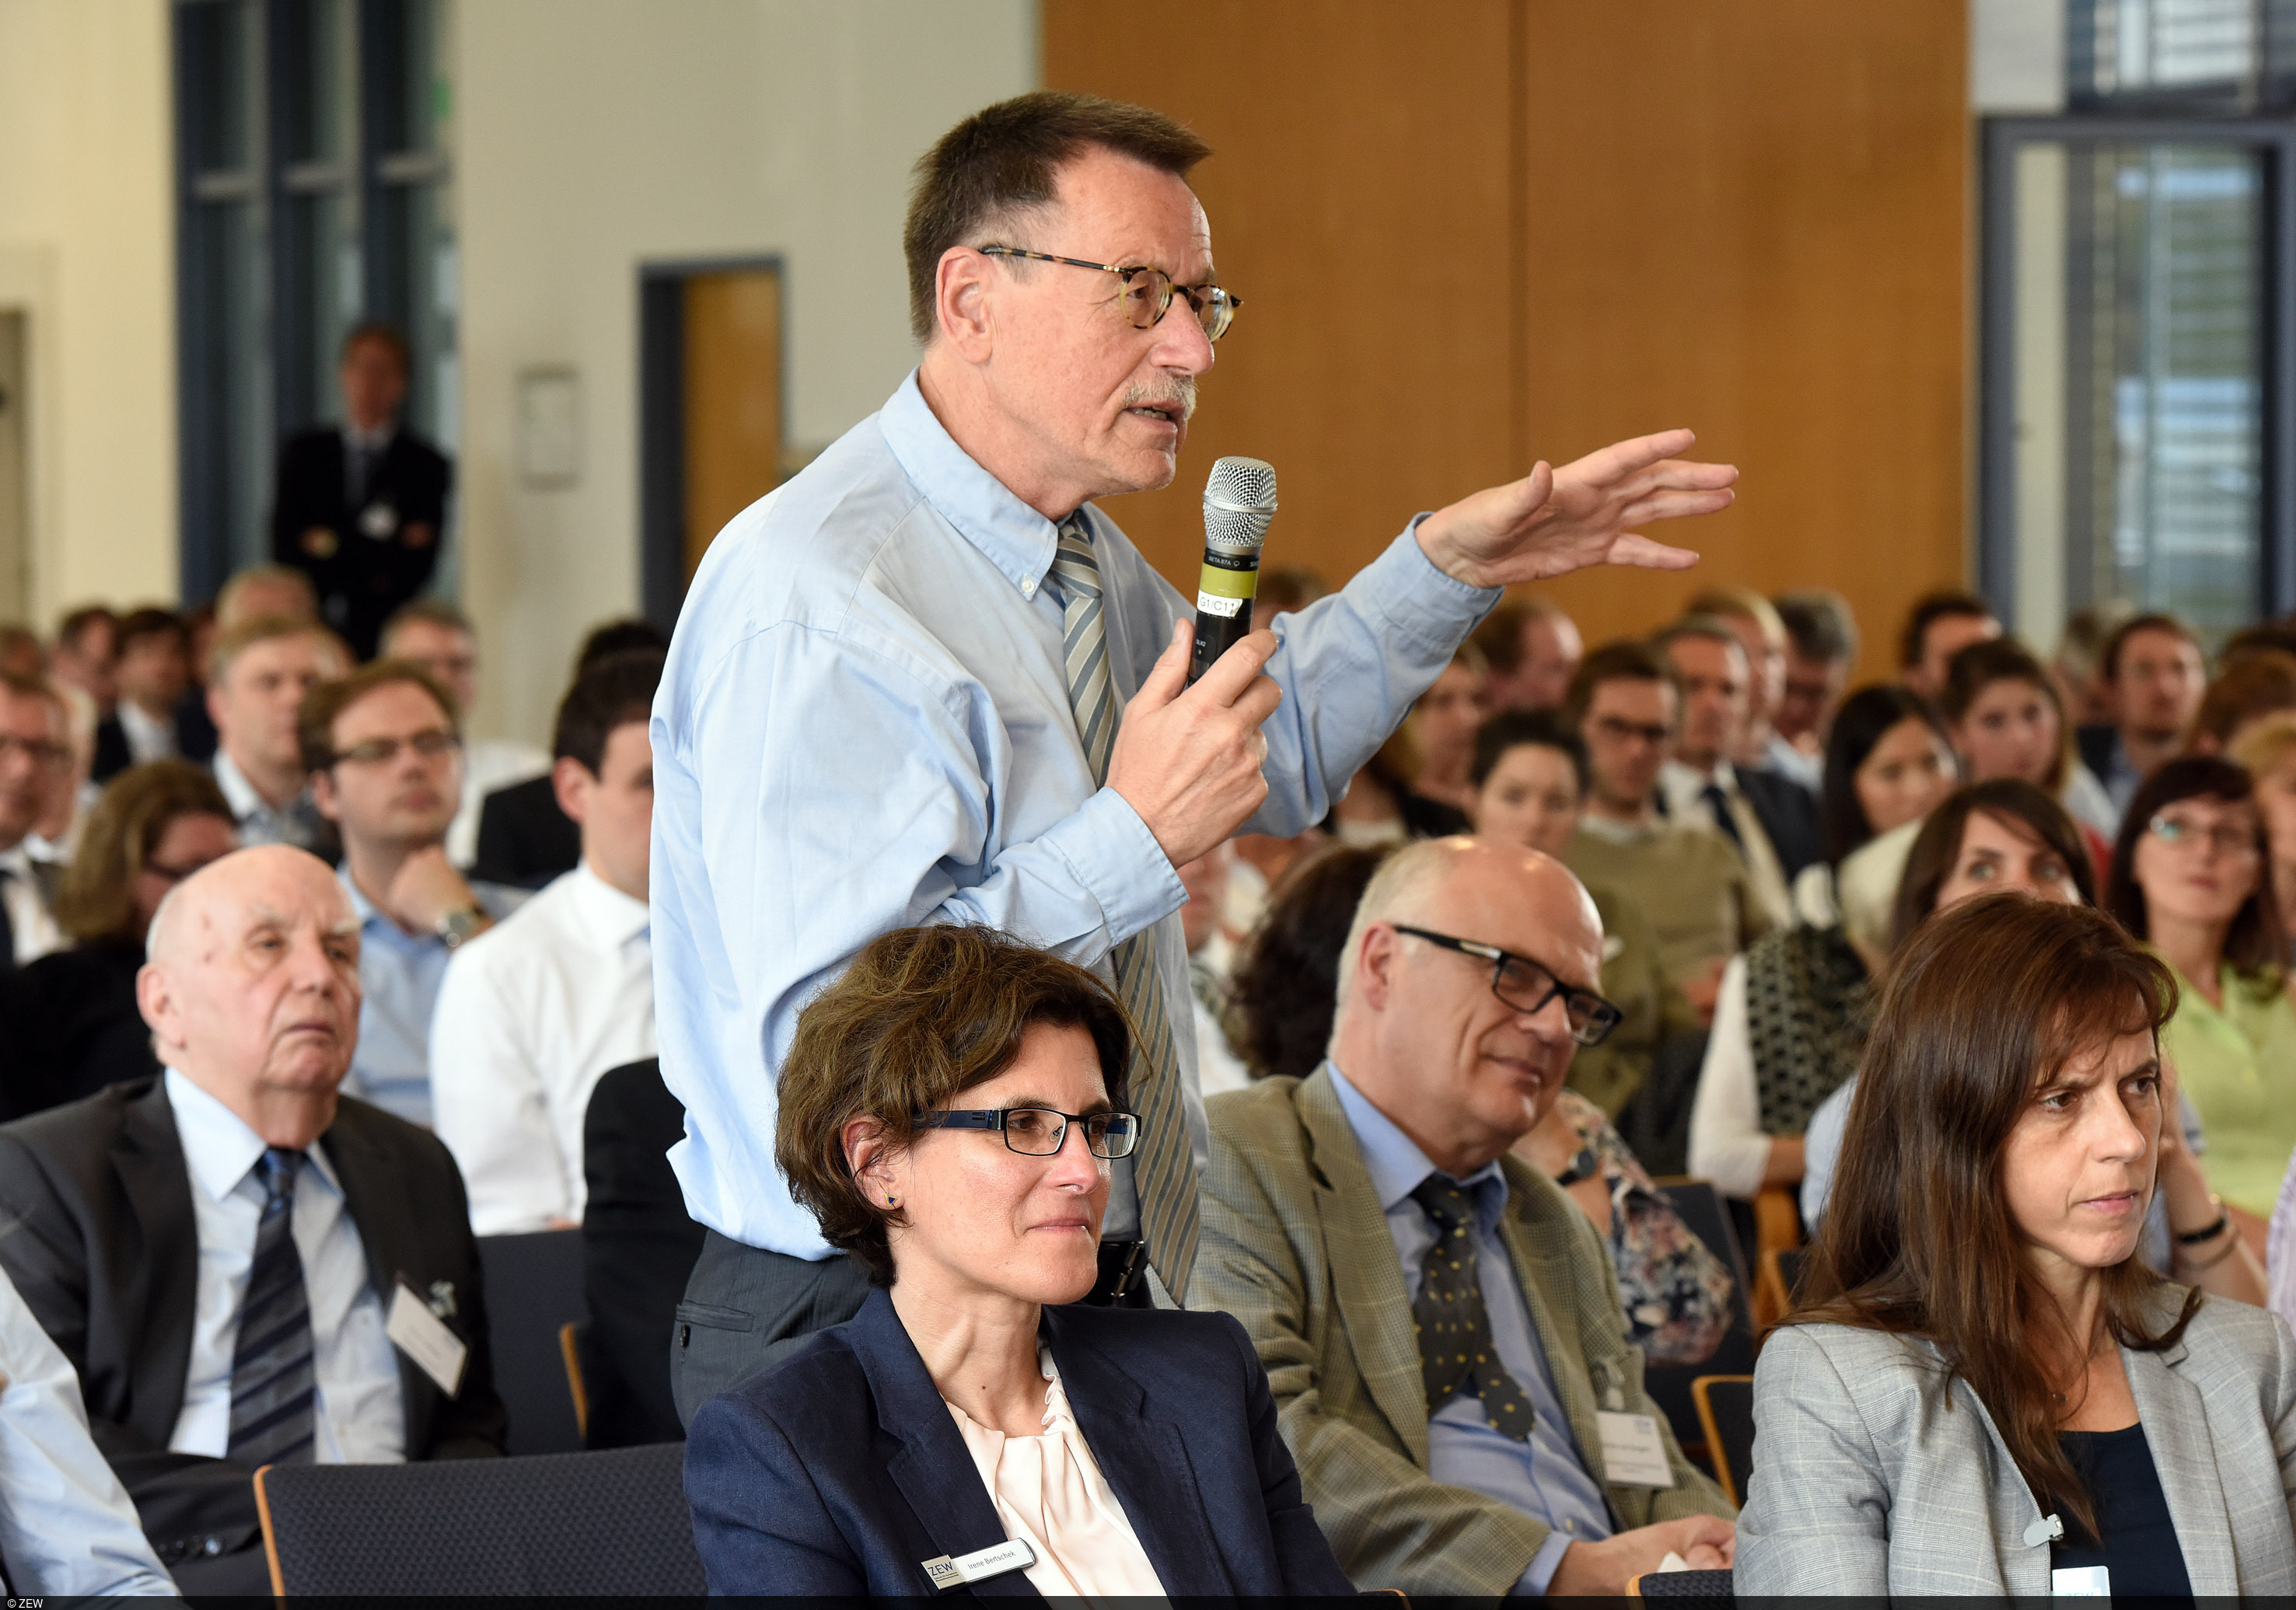 An audience member asking a question to the panellists of the ZEW Economic Forum 2016